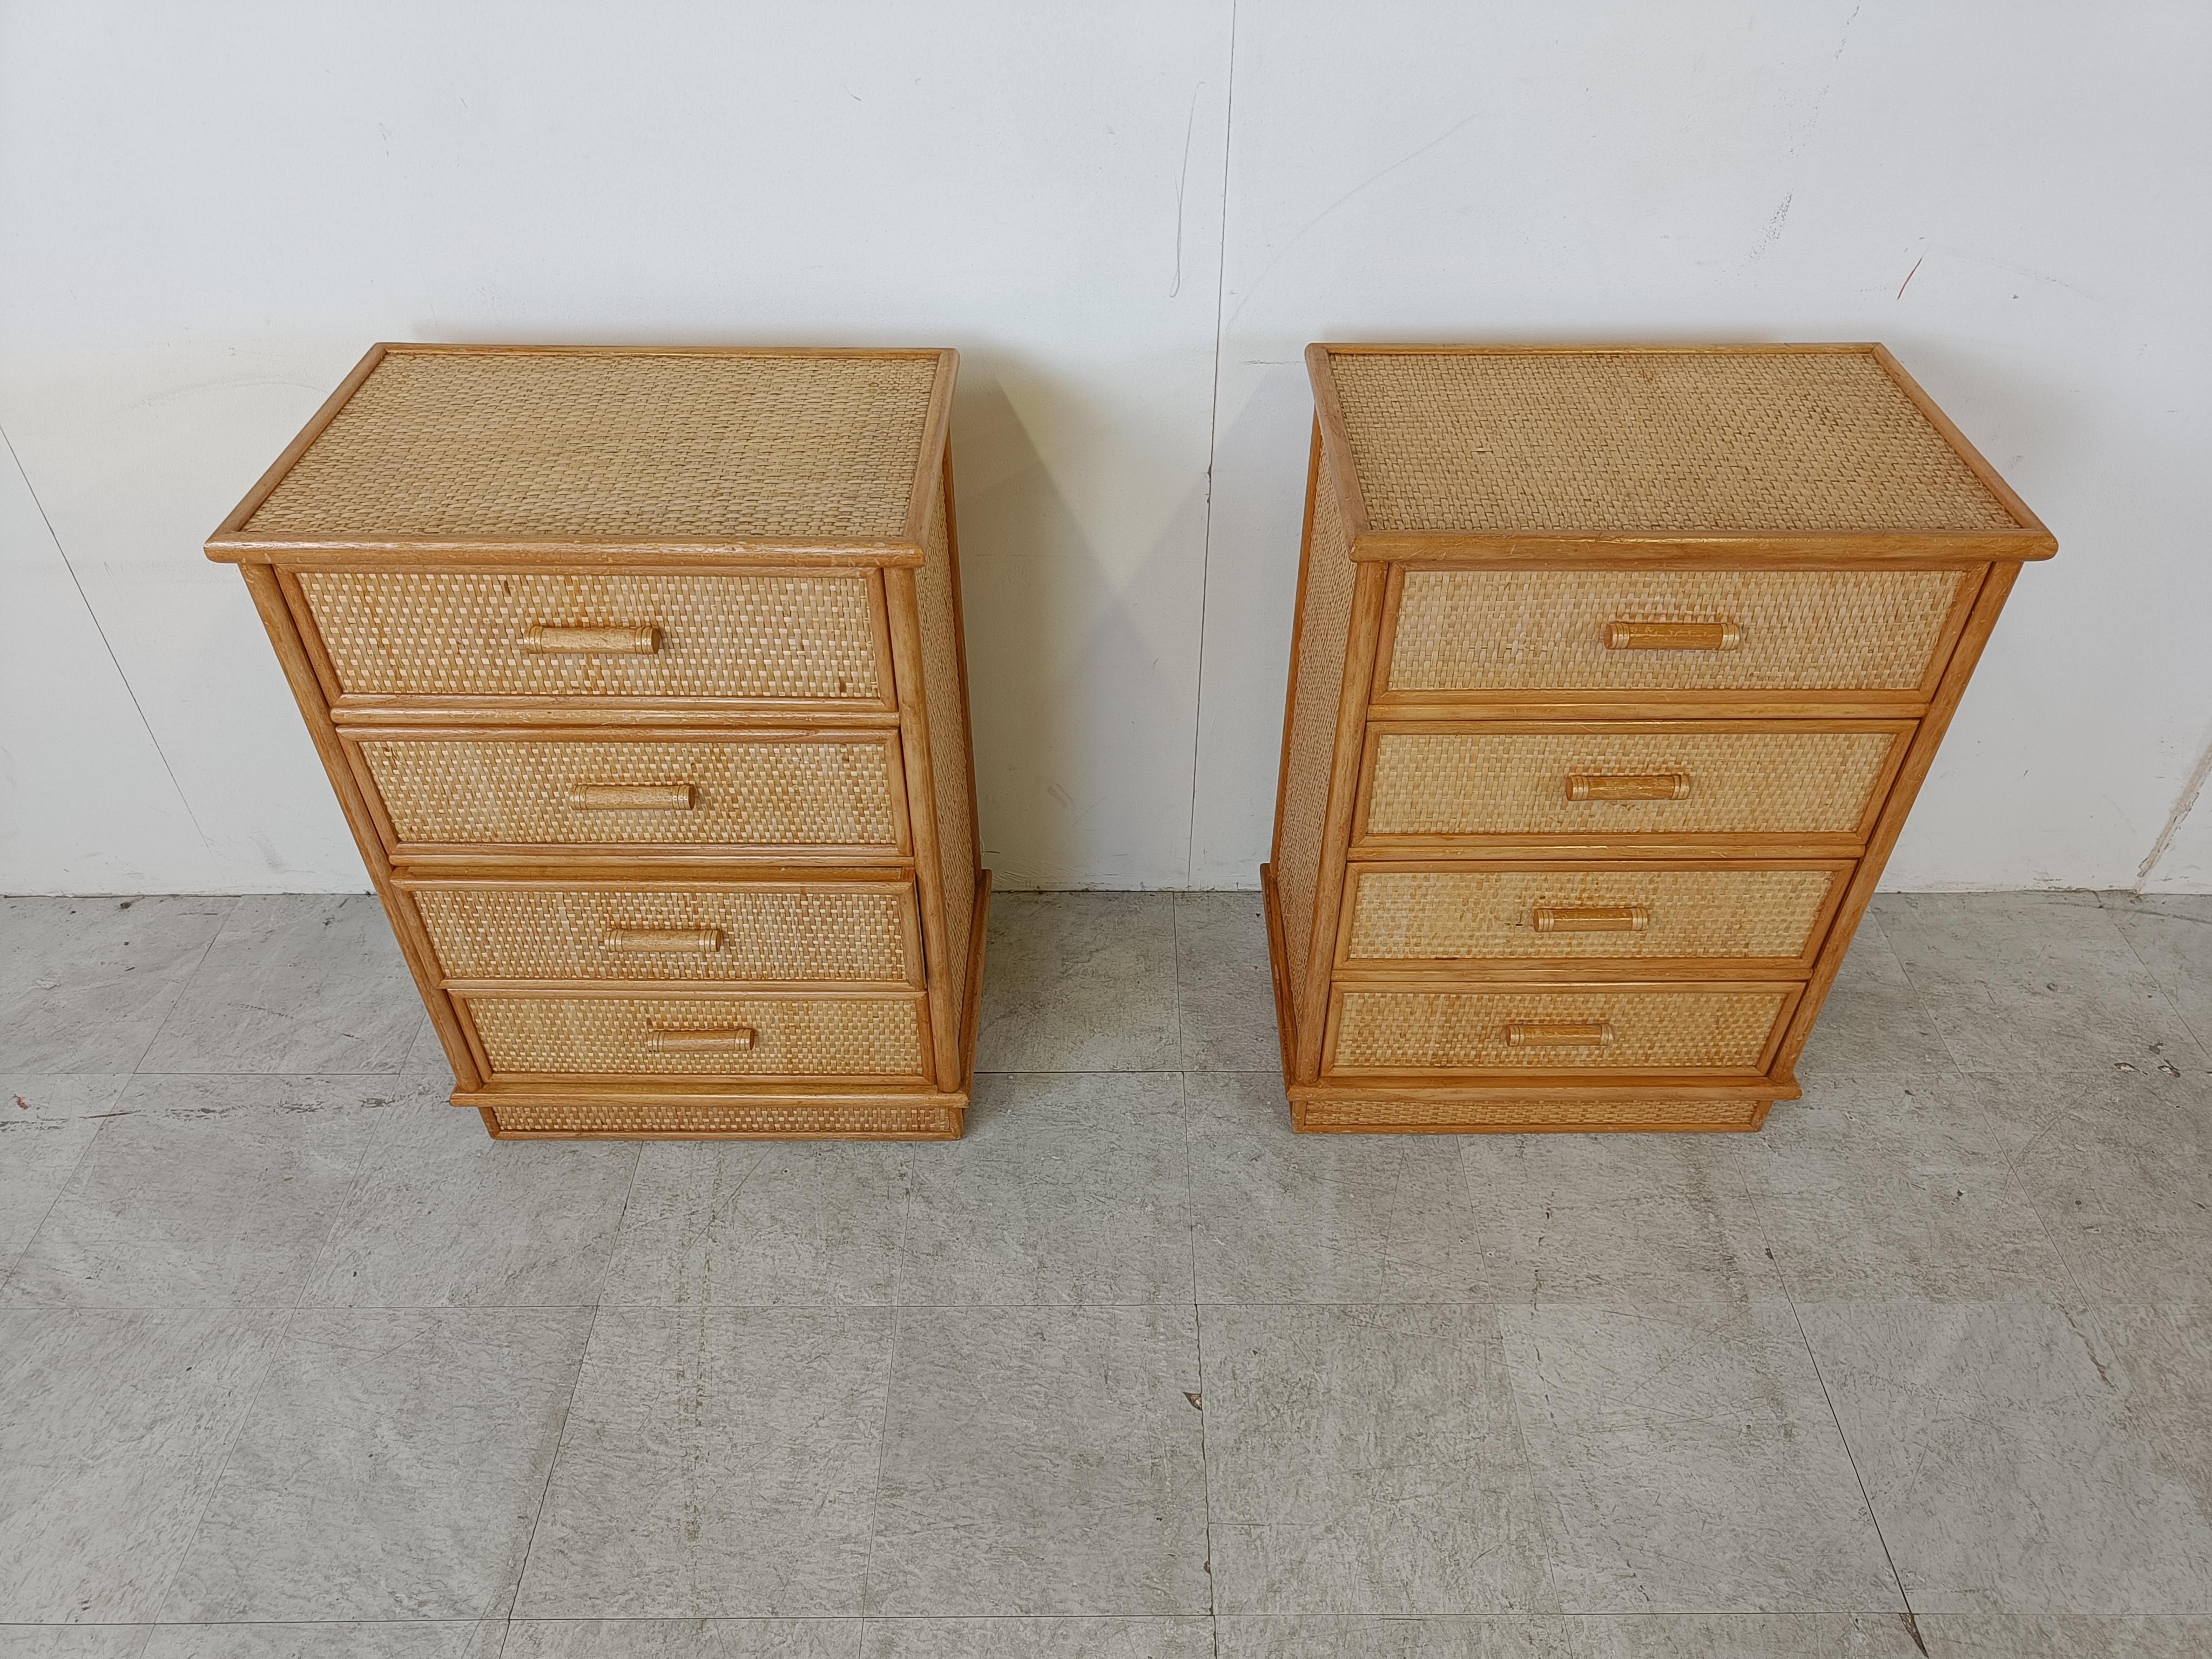 Pair of elegant vintage cabinets or small chest of drawers made from bamboo and rattan.

Bought from first owner who acquired them in the seventies.

Lovely pieces for a bathroom or bedroom.

1970s - France

Dimensions:

Lenght: 55cm/21.65